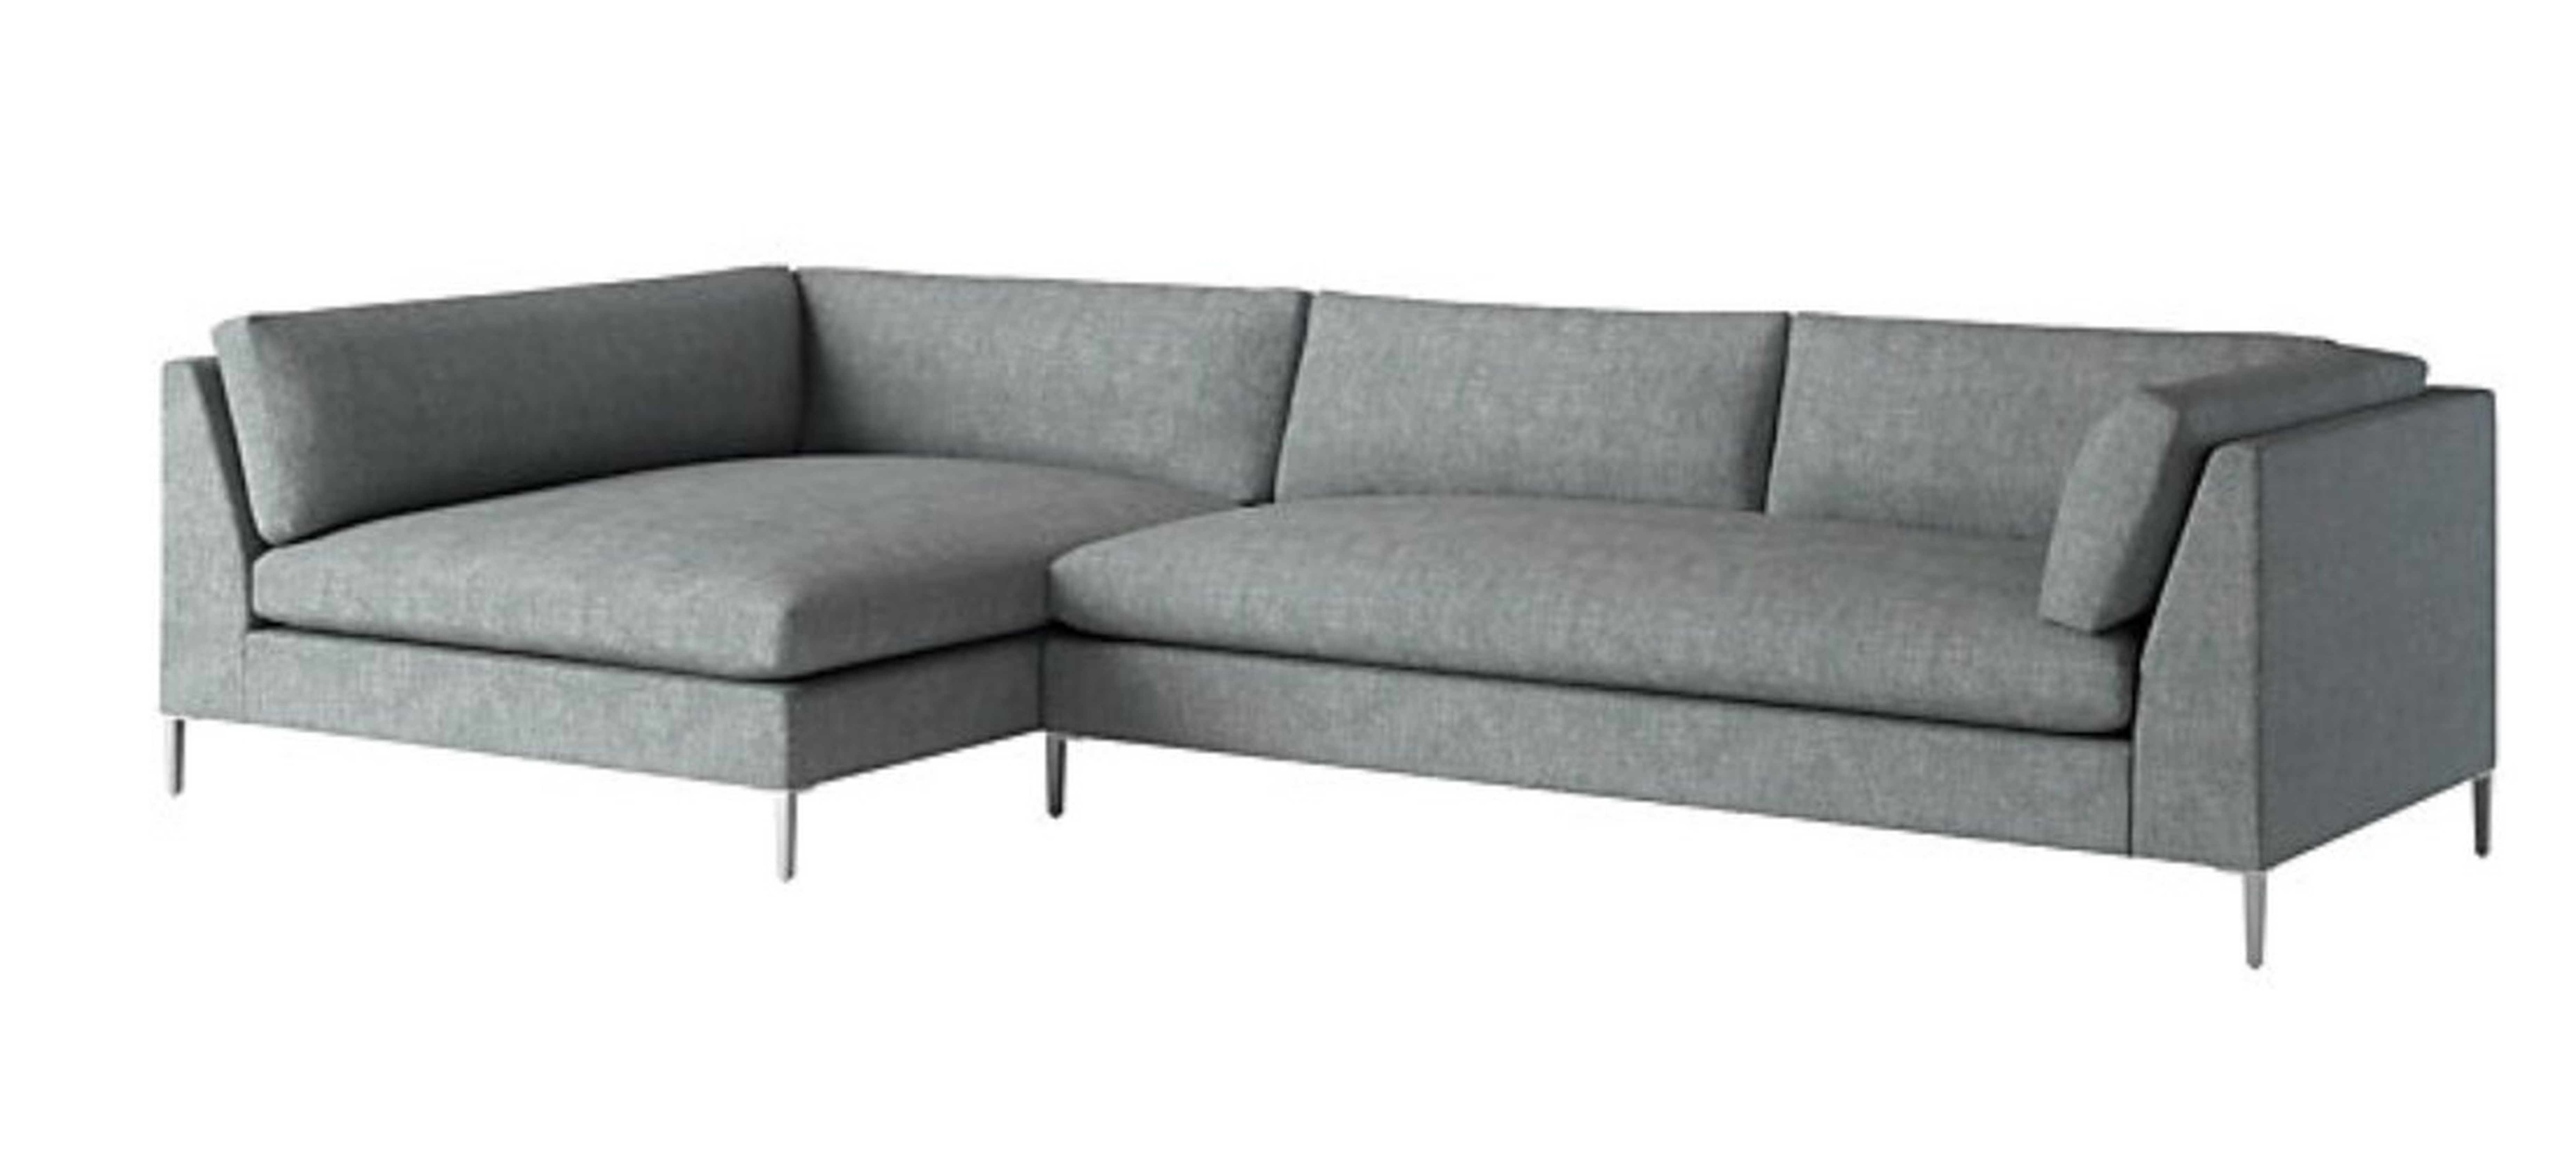 DECKER 2-PIECE SECTIONAL SOFA - Nomad, Charcoal - LEFT Arm - CB2